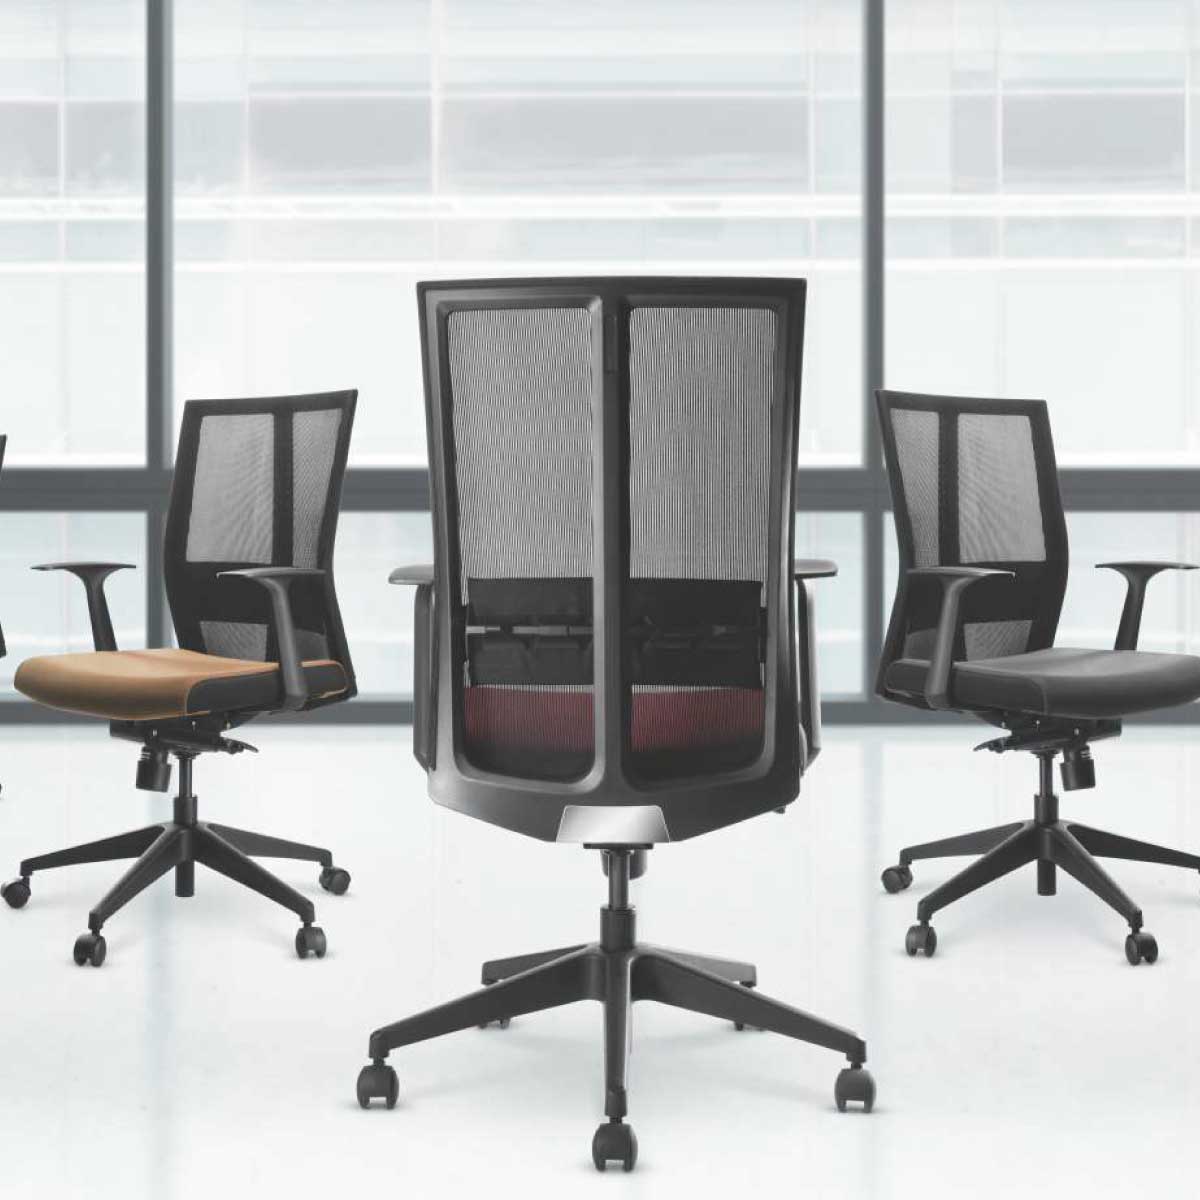 Visitor Chair Manufacturers, Suppliers in Chittaranjan Park